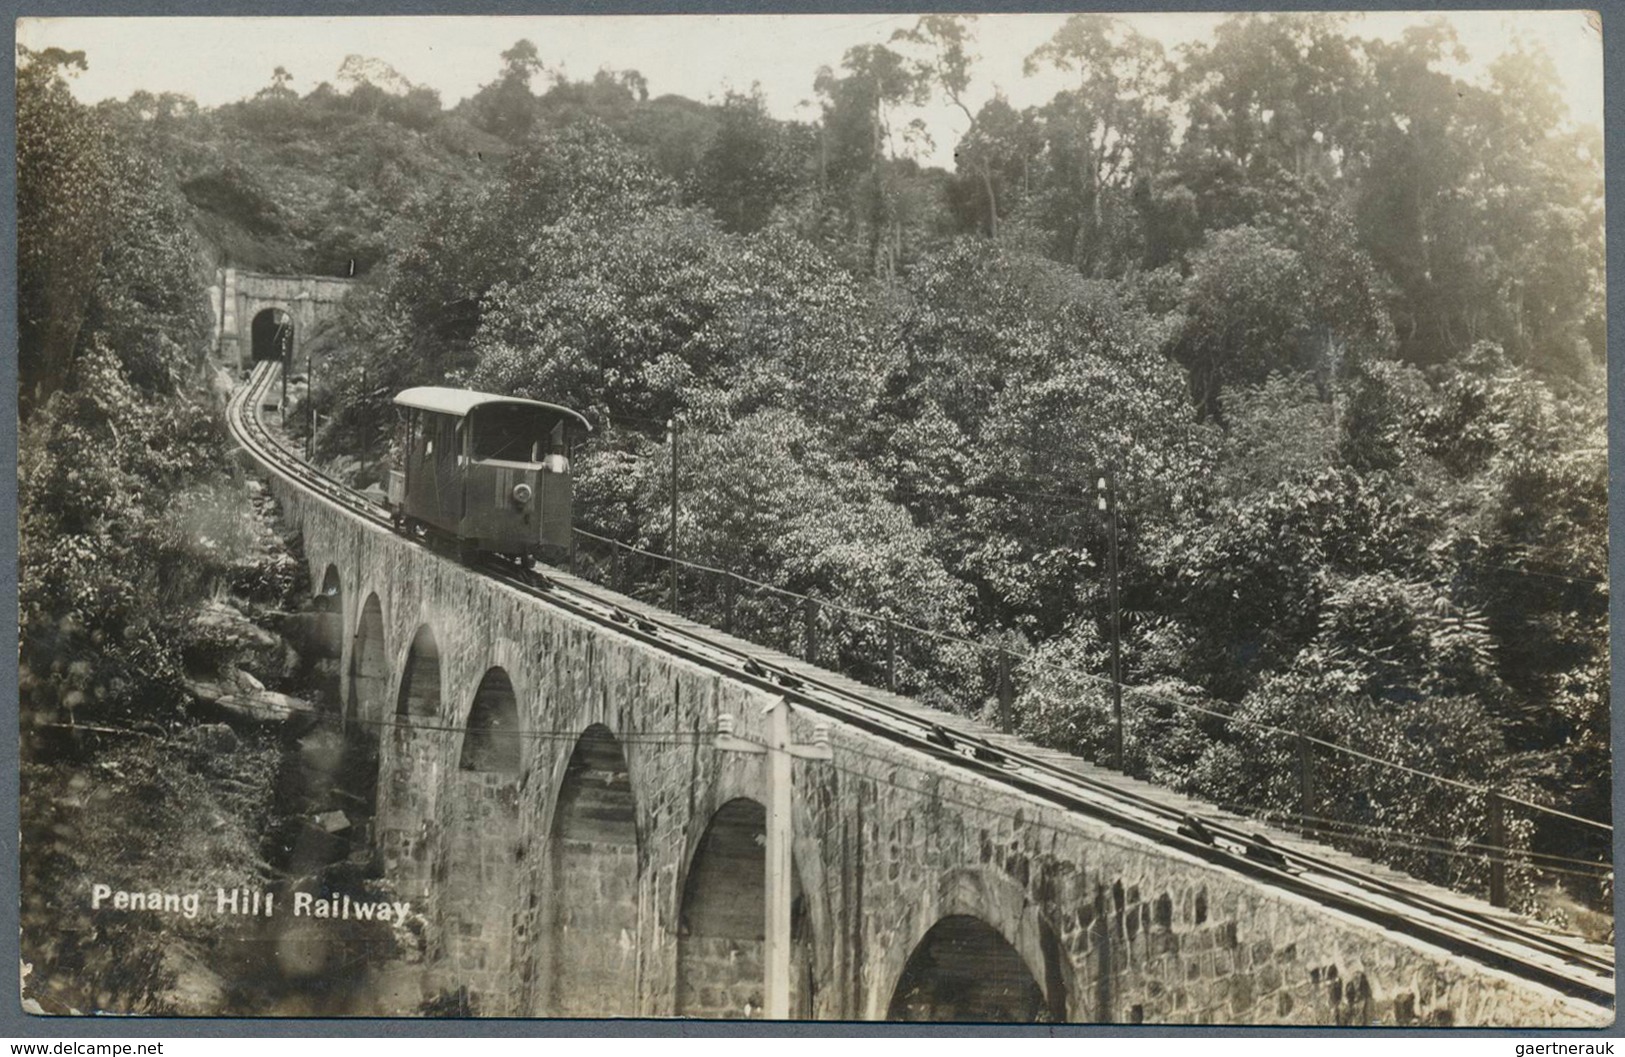 05385 Malaiische Staaten - Straits Settlements: 1925, Photo Card Showing "Penang Hill Railway" Addressed T - Straits Settlements